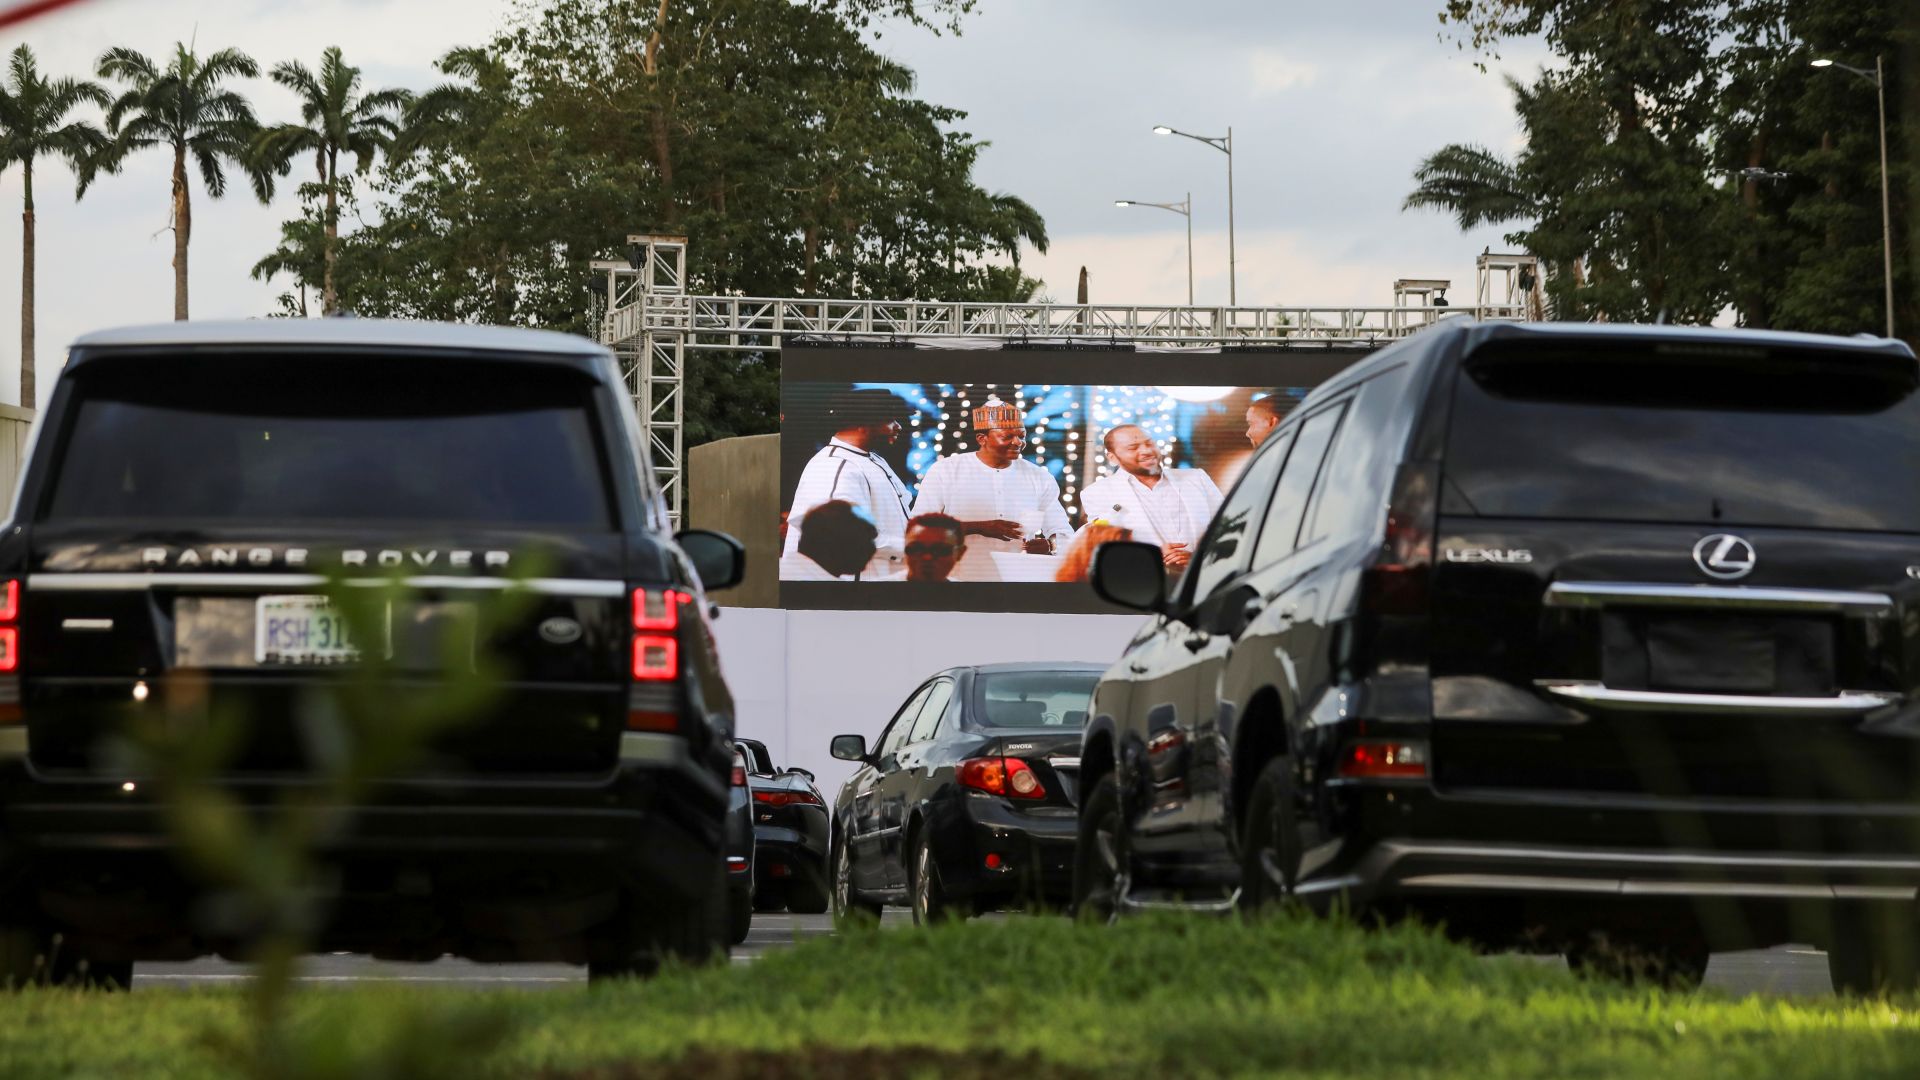 Movie audiences sit in their parked cars as they watch a movie at a drive-in cinema amid the COVID-19 outbreak in Abuja